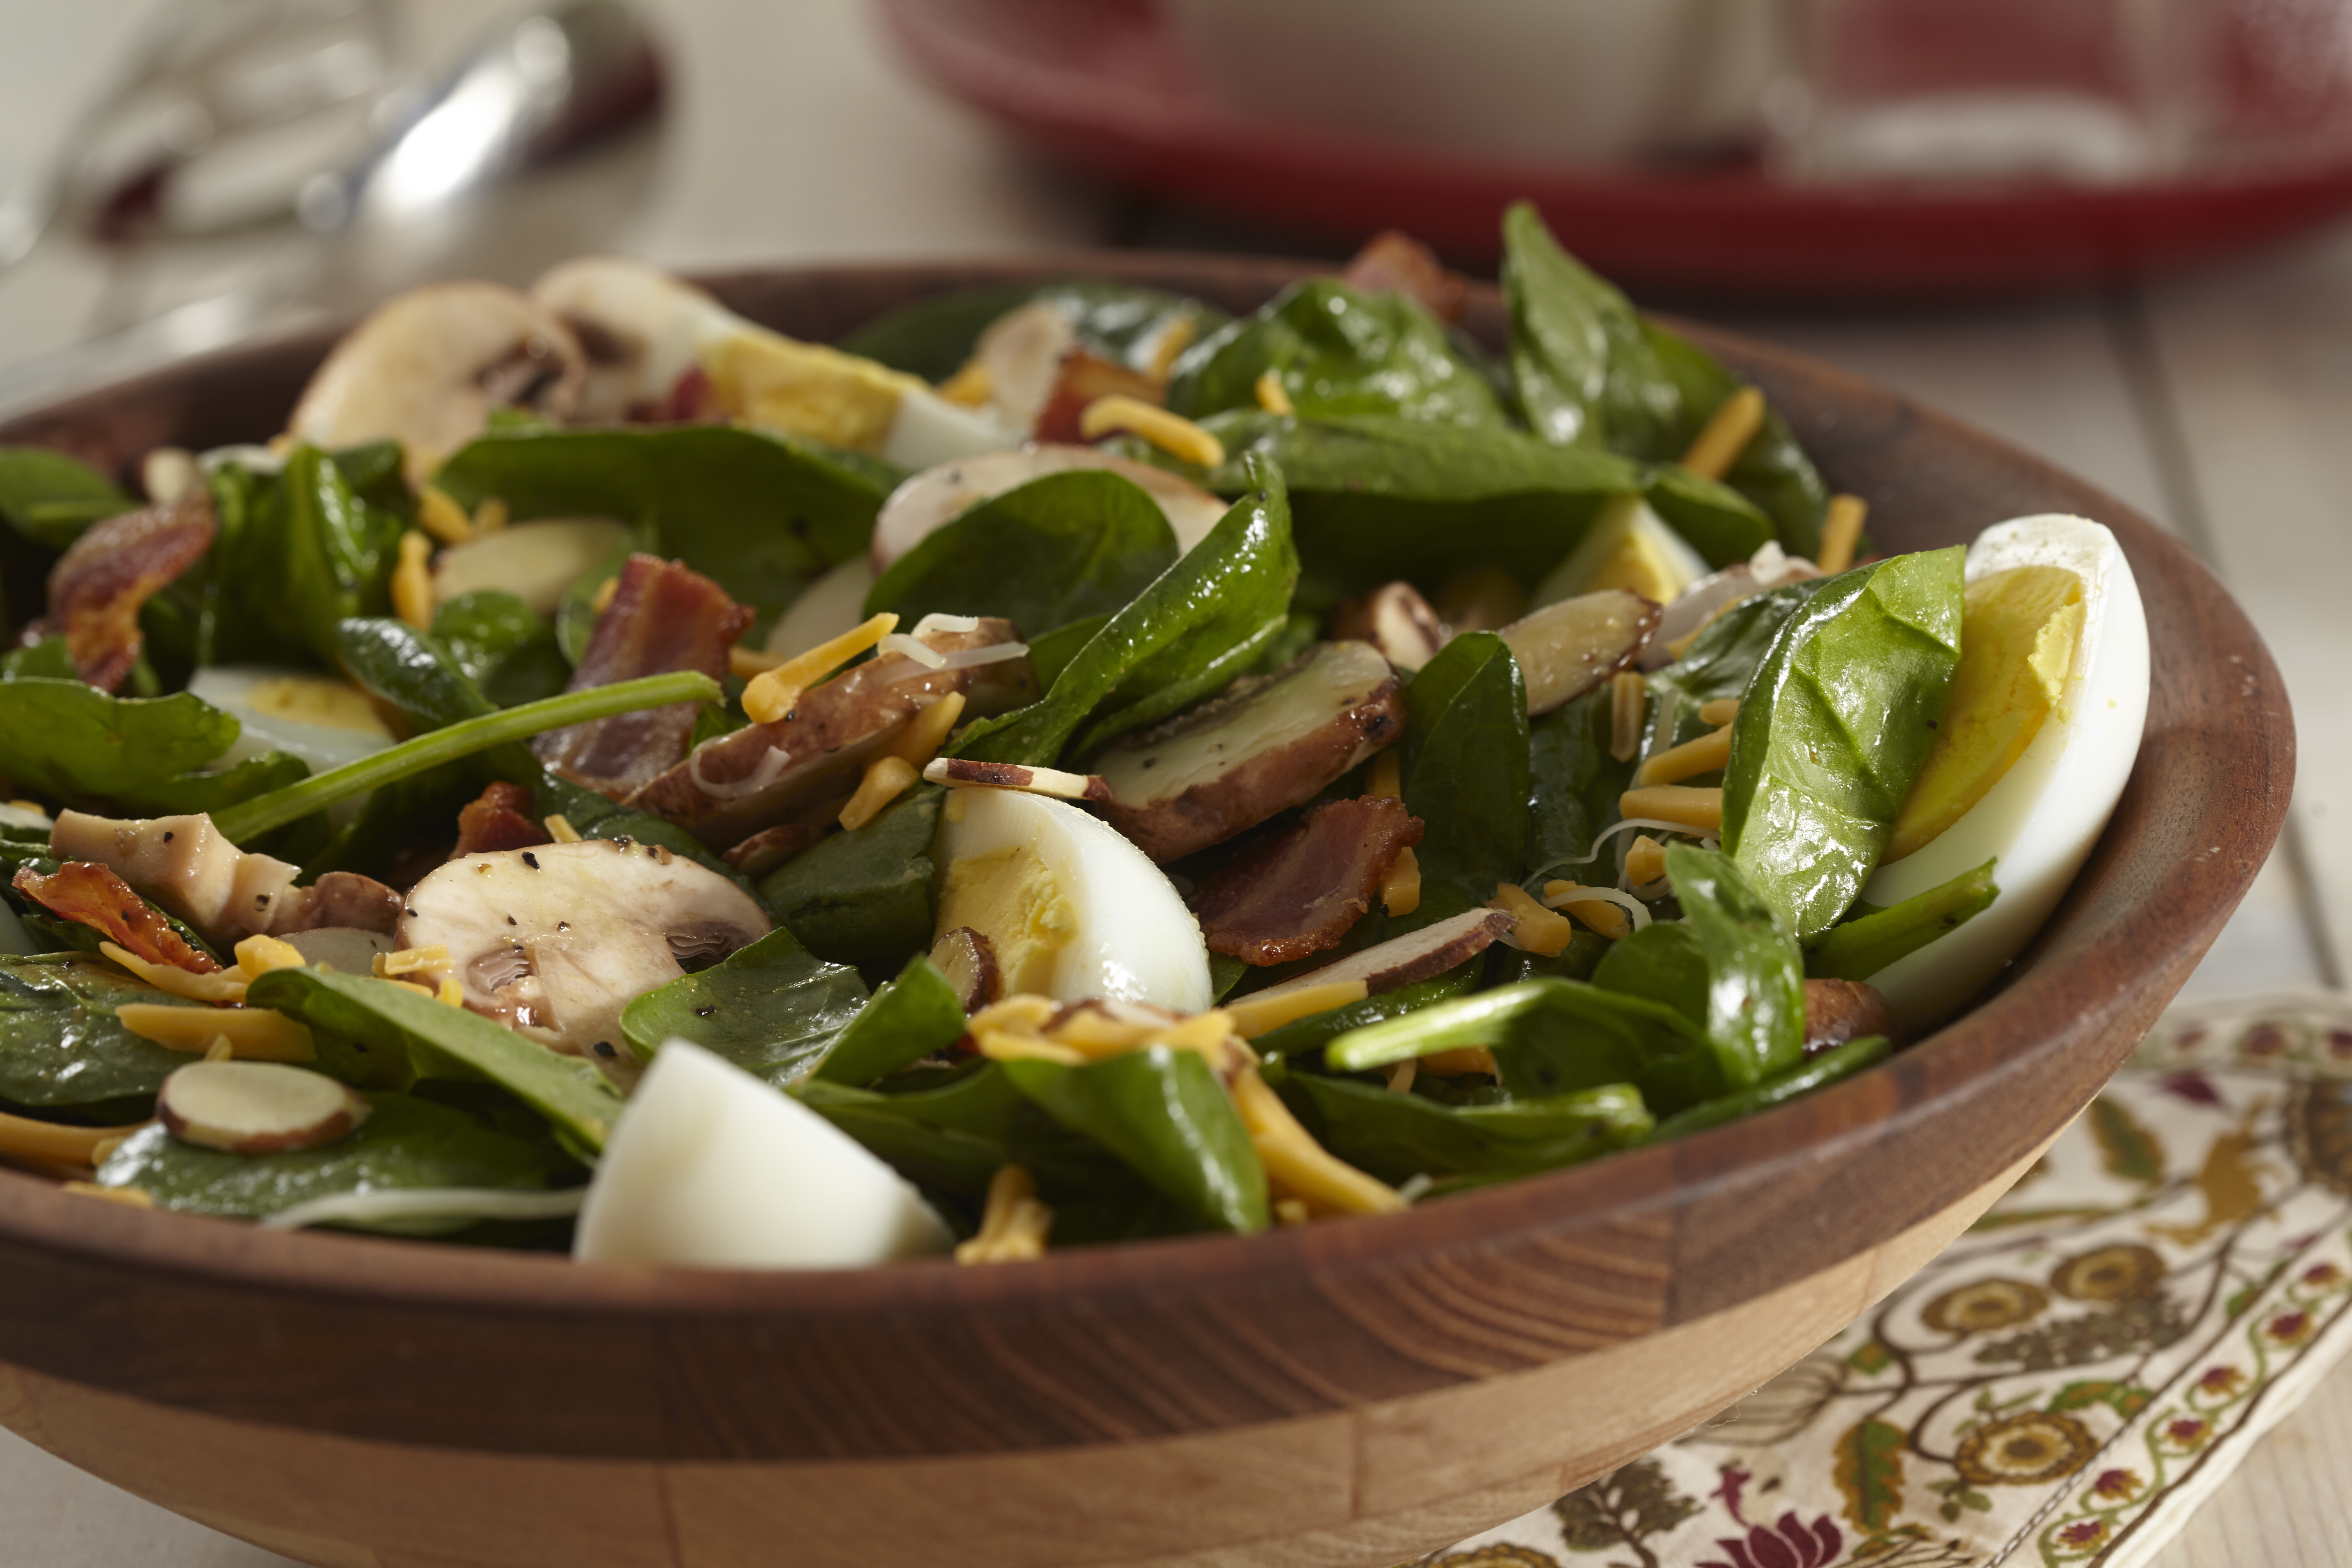 Hot Spinach Salad with Honey-Dijon Dressing